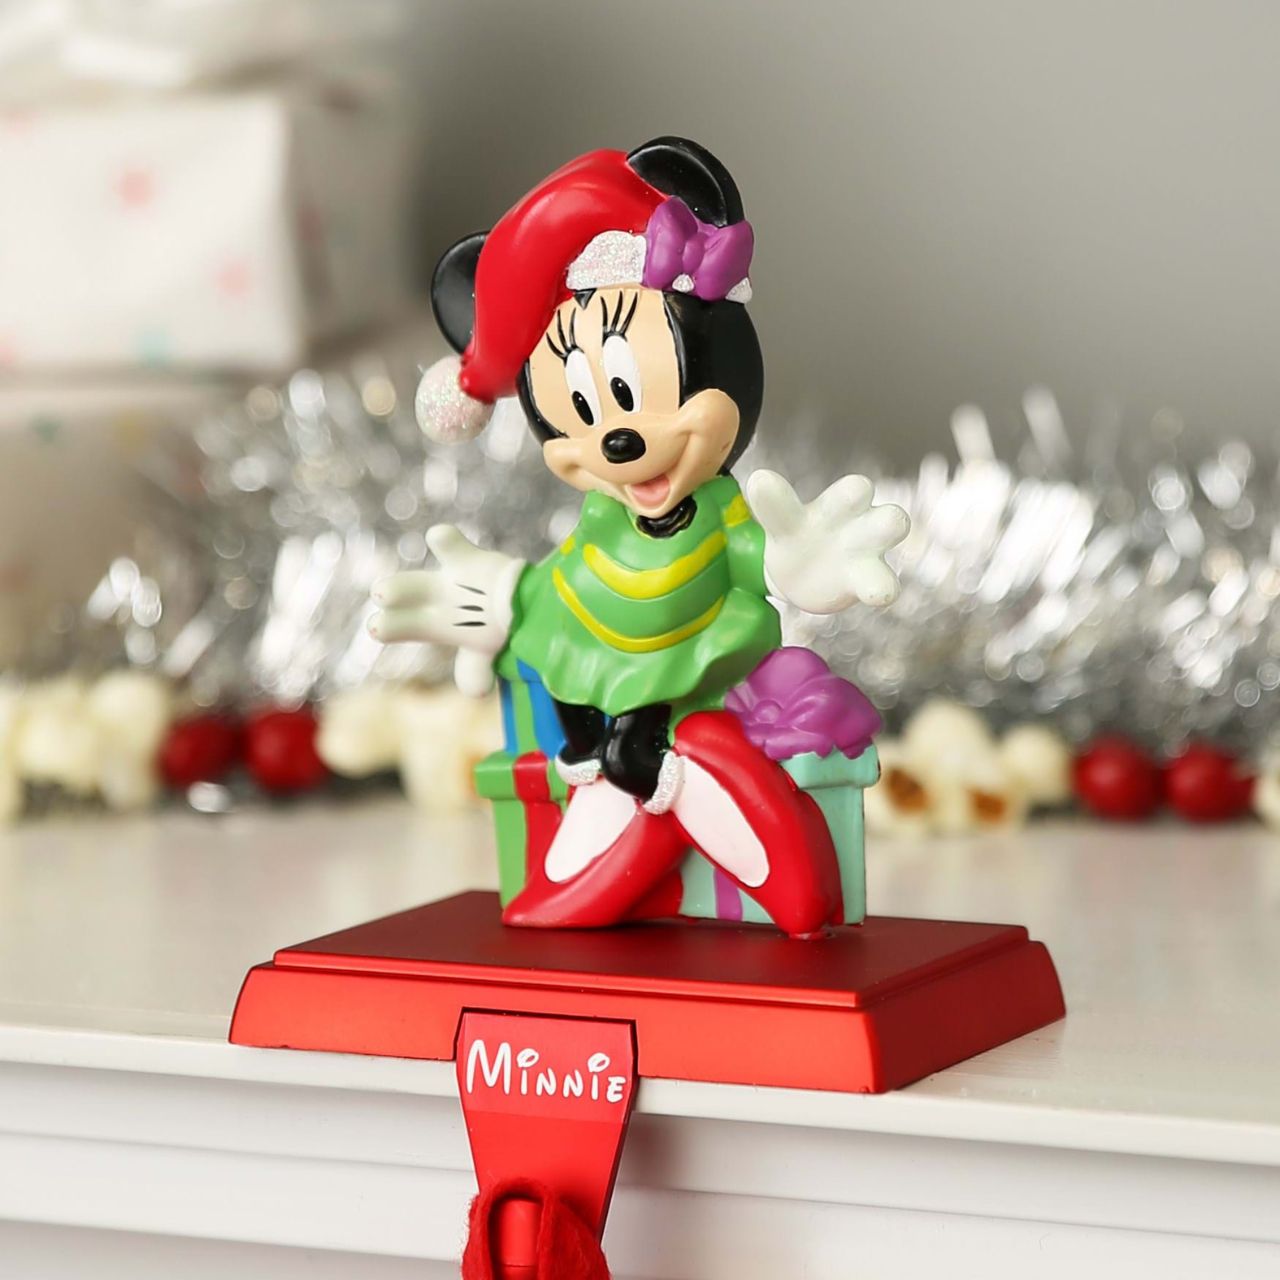 Kurt S Adler Minnie Mouse Stocking Holder  Hang up your favorite stocking this Christmas with this Disney Minnie Mouse stocking hanger from Kurt Adler. Features Minnie Mouse wearing a green dress, and a red and white Santa hat standing in front of wrapped presents.